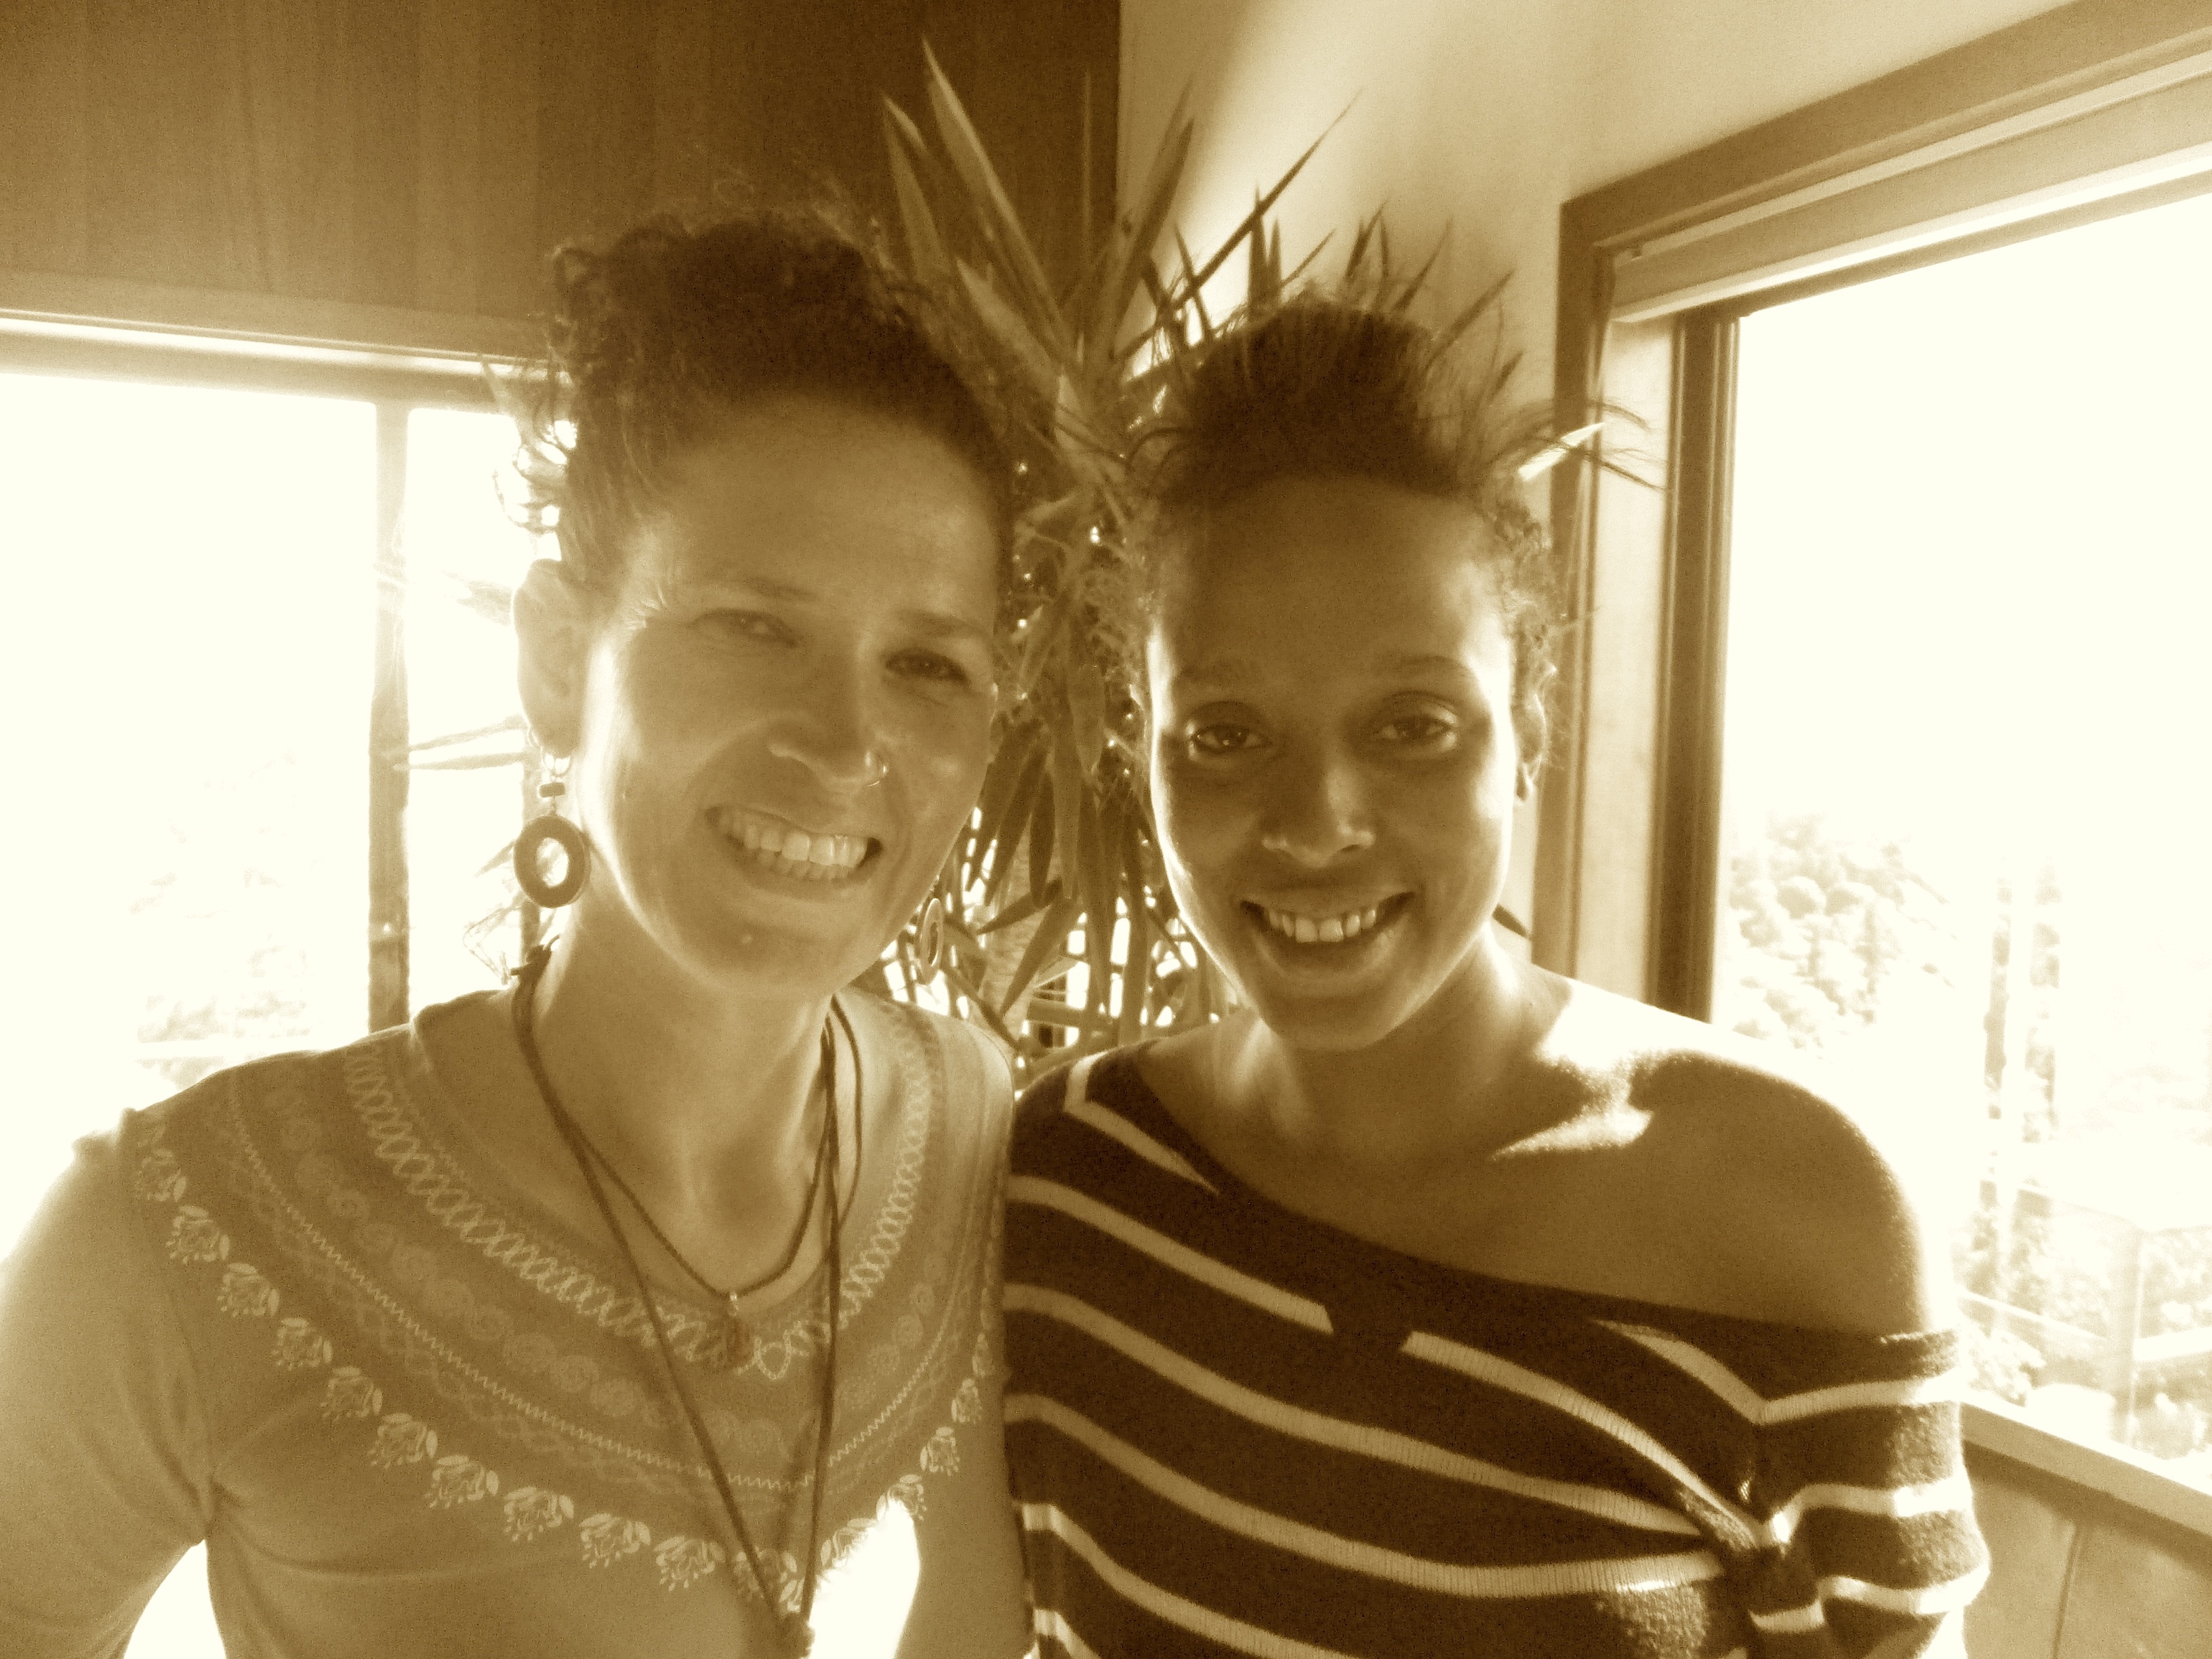 Mira Arad with the well-known musician Ester Rada (Ethiopia/Israel).